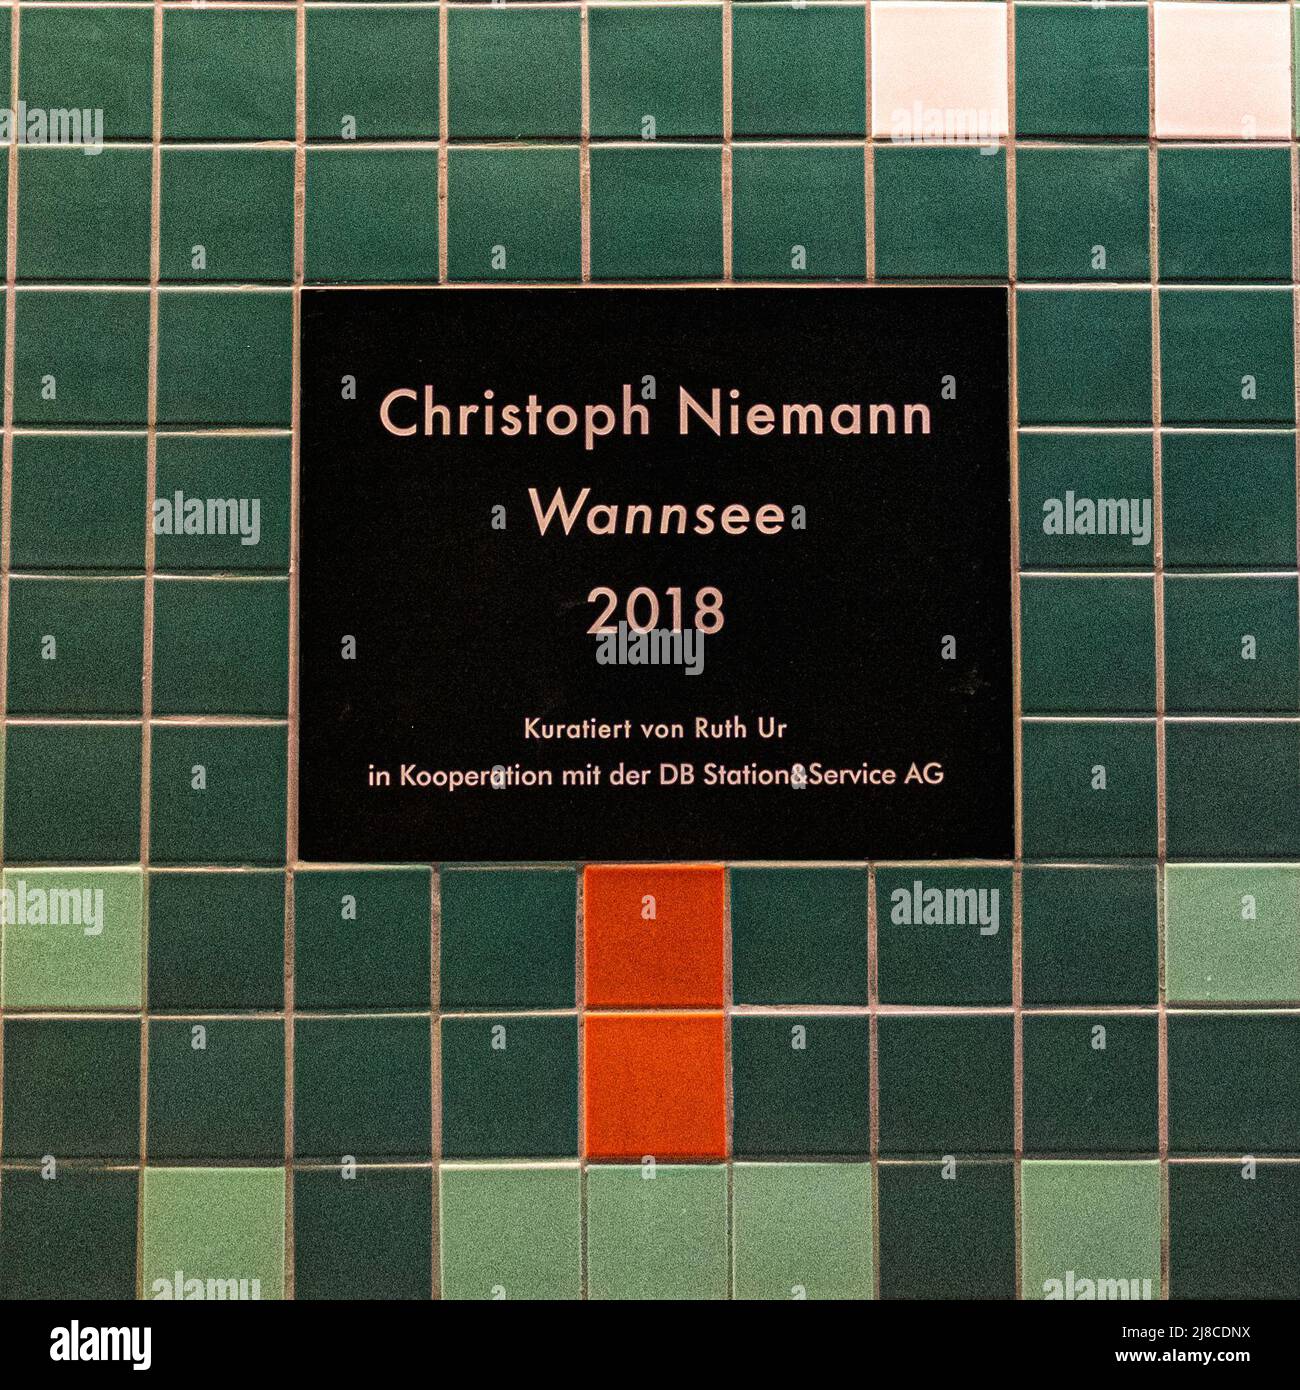 Berlin-Wannsee railway station interior tiled passage & Christophe Niemann 2018 plaque. Important junction in the commuter transport network serving the S-bahn and Deutsche Bahn train services. Stock Photo